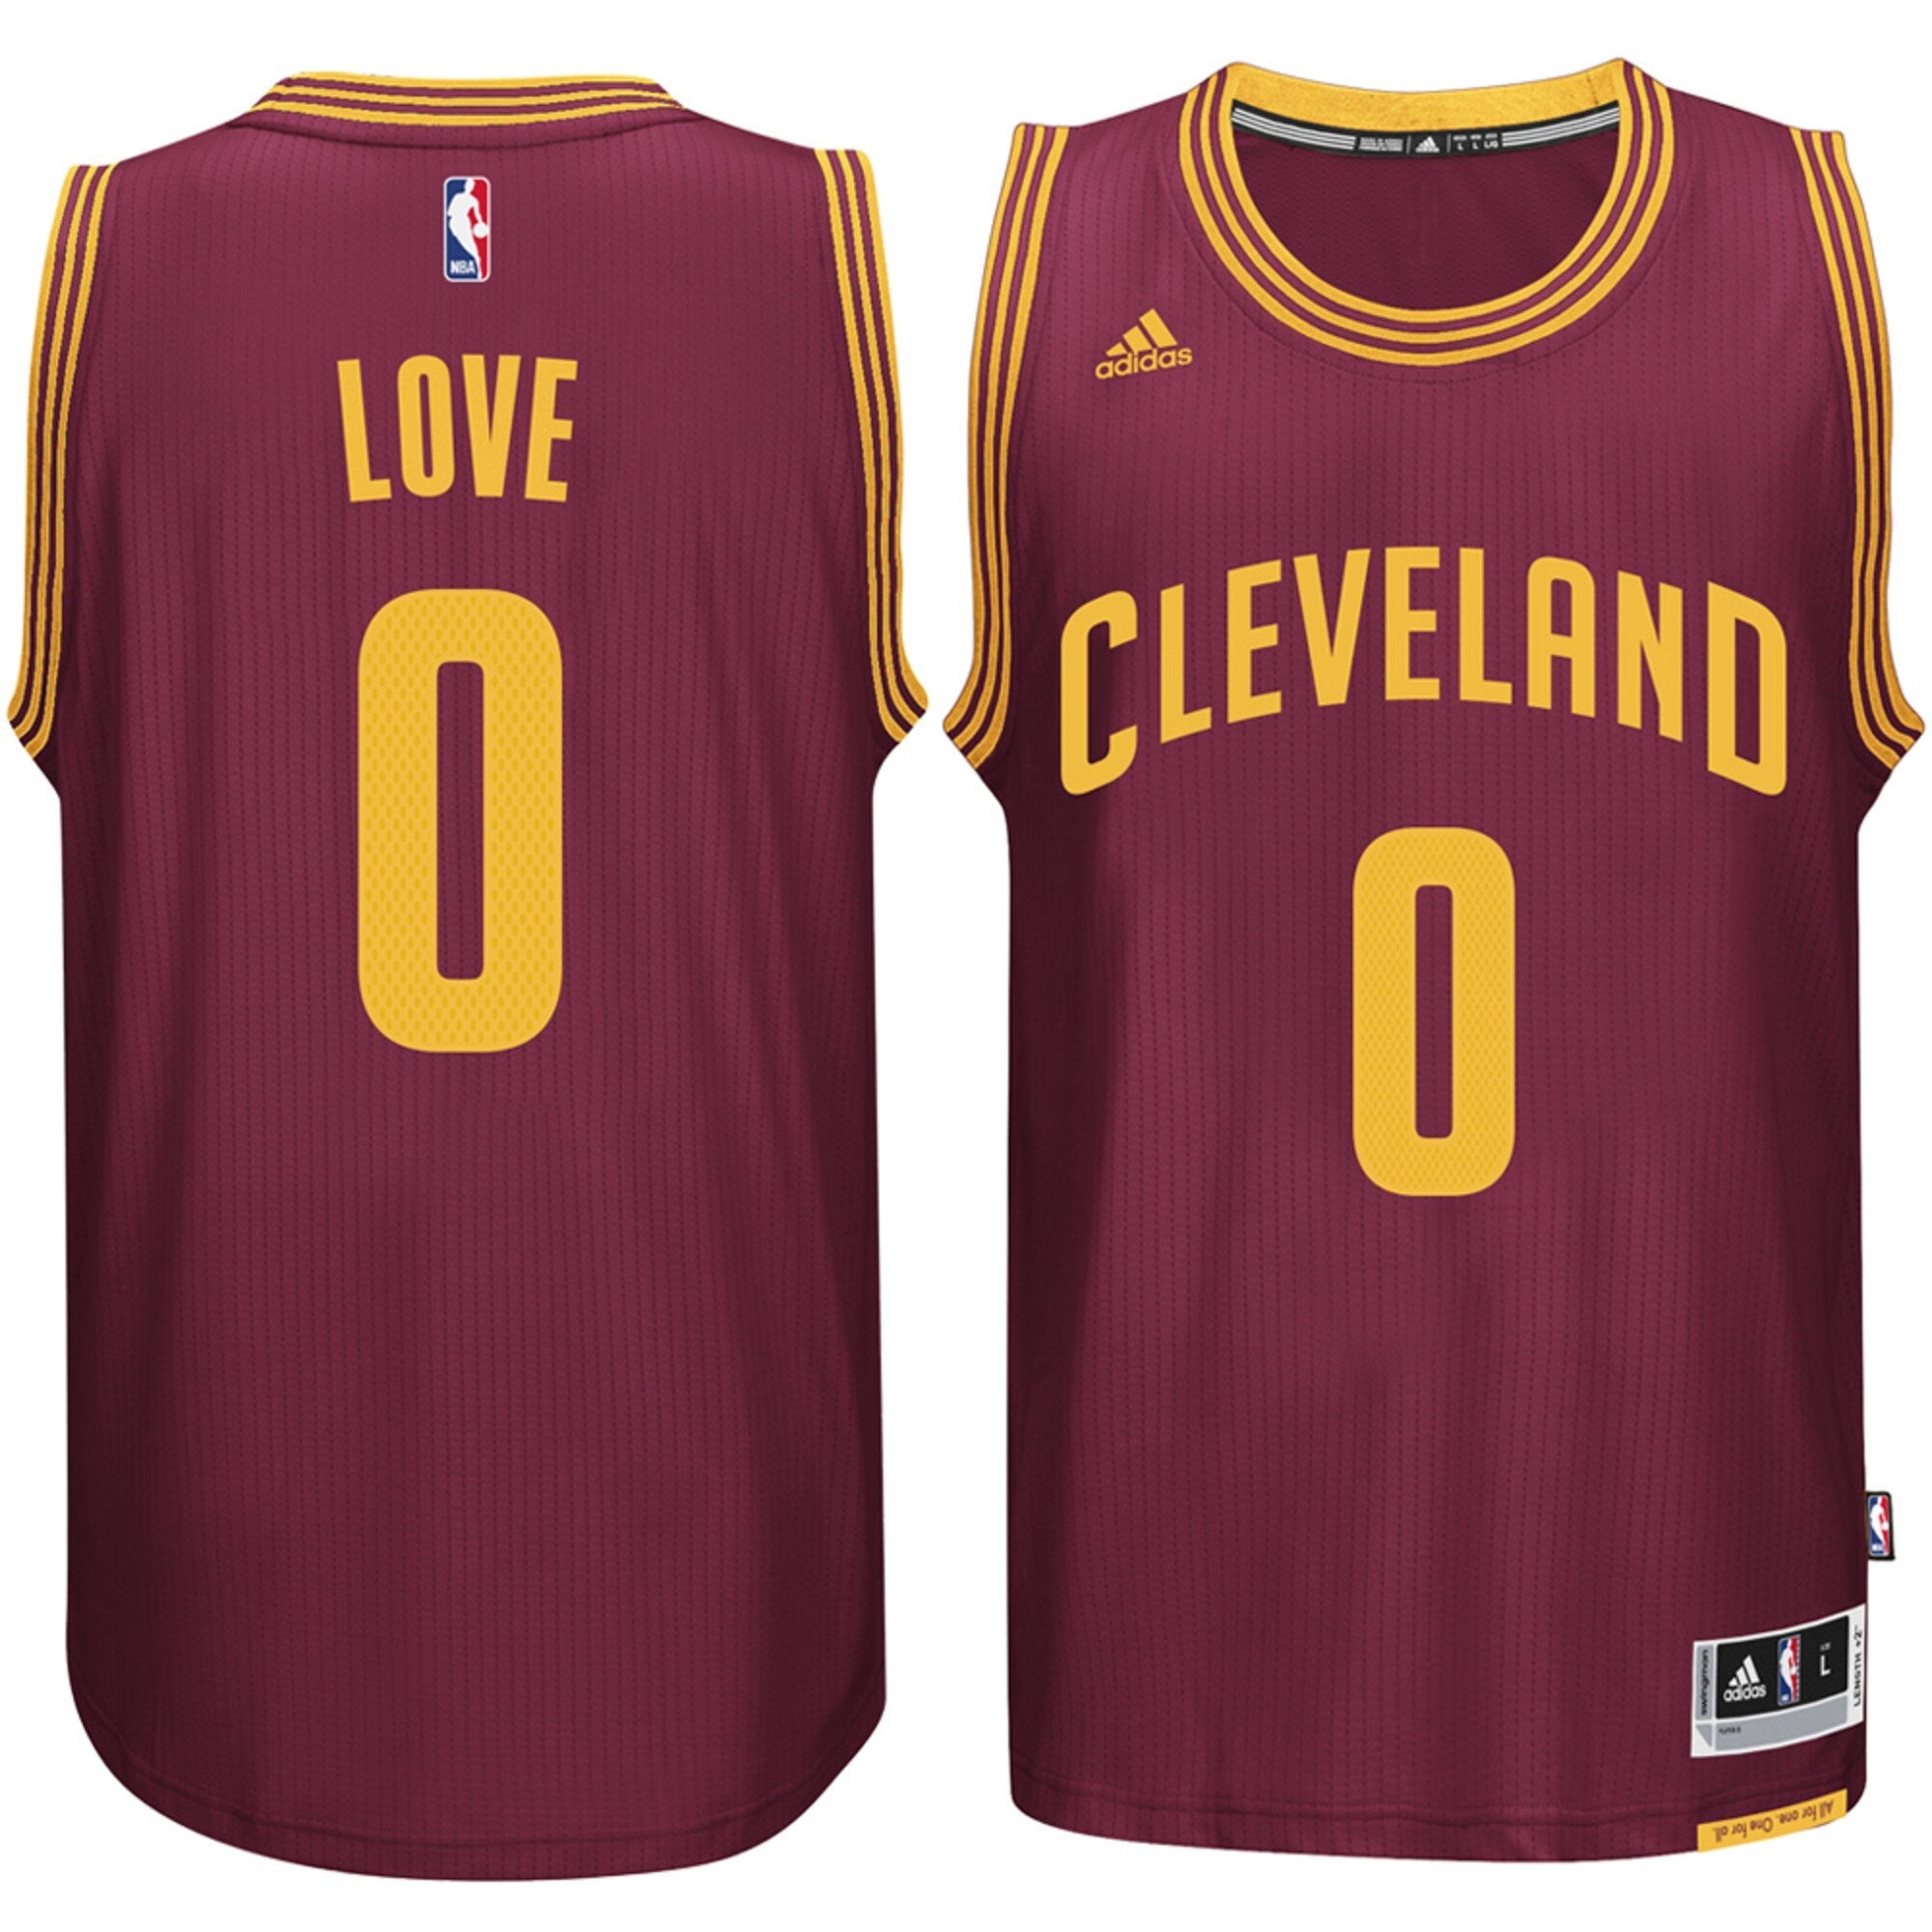 [A63826] Mens Adidas Cleveland Cavaliers Swingman Jersey Kevin Love